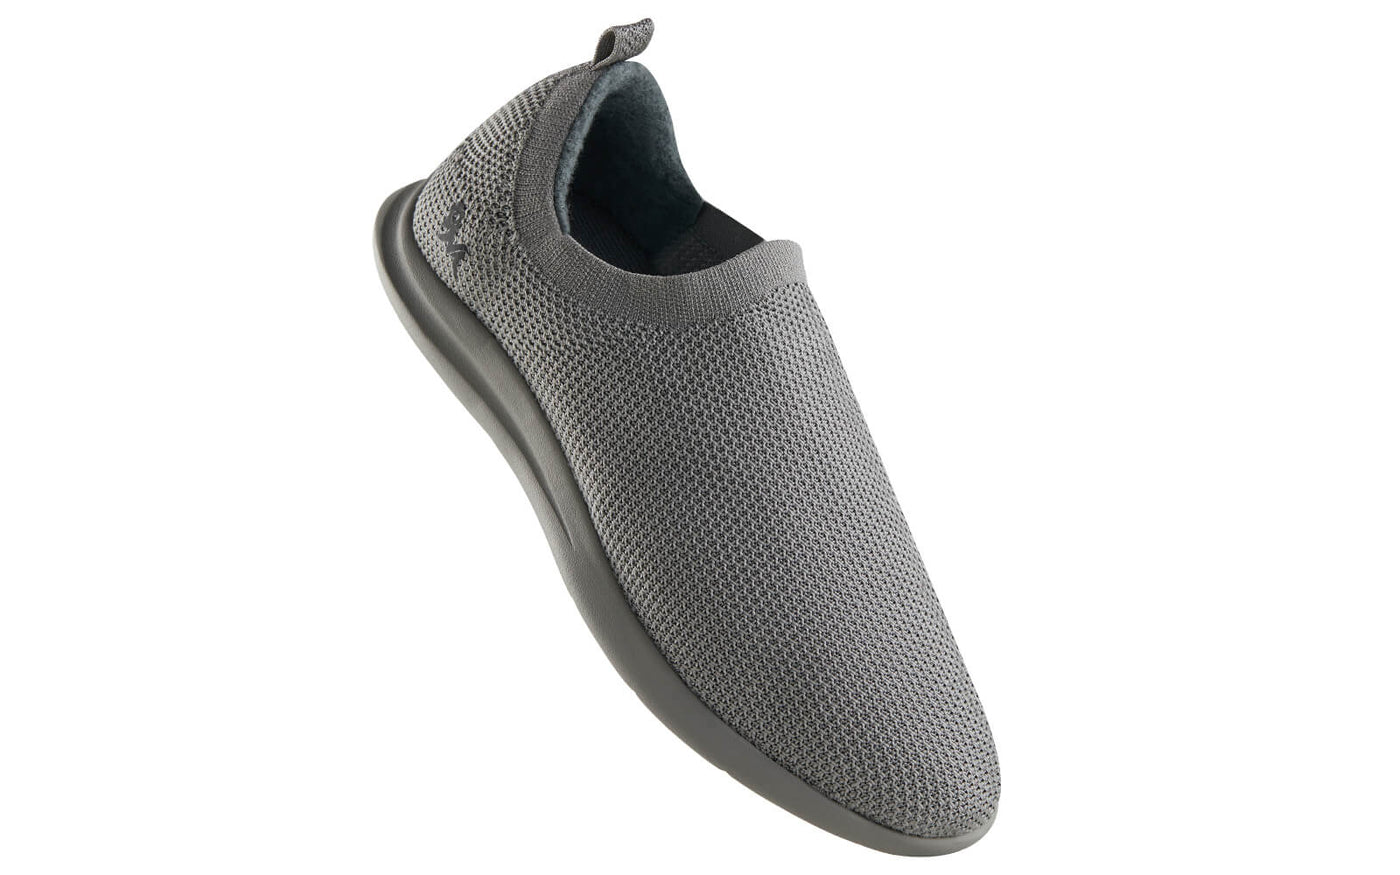 ReLive Knit Slip Ons